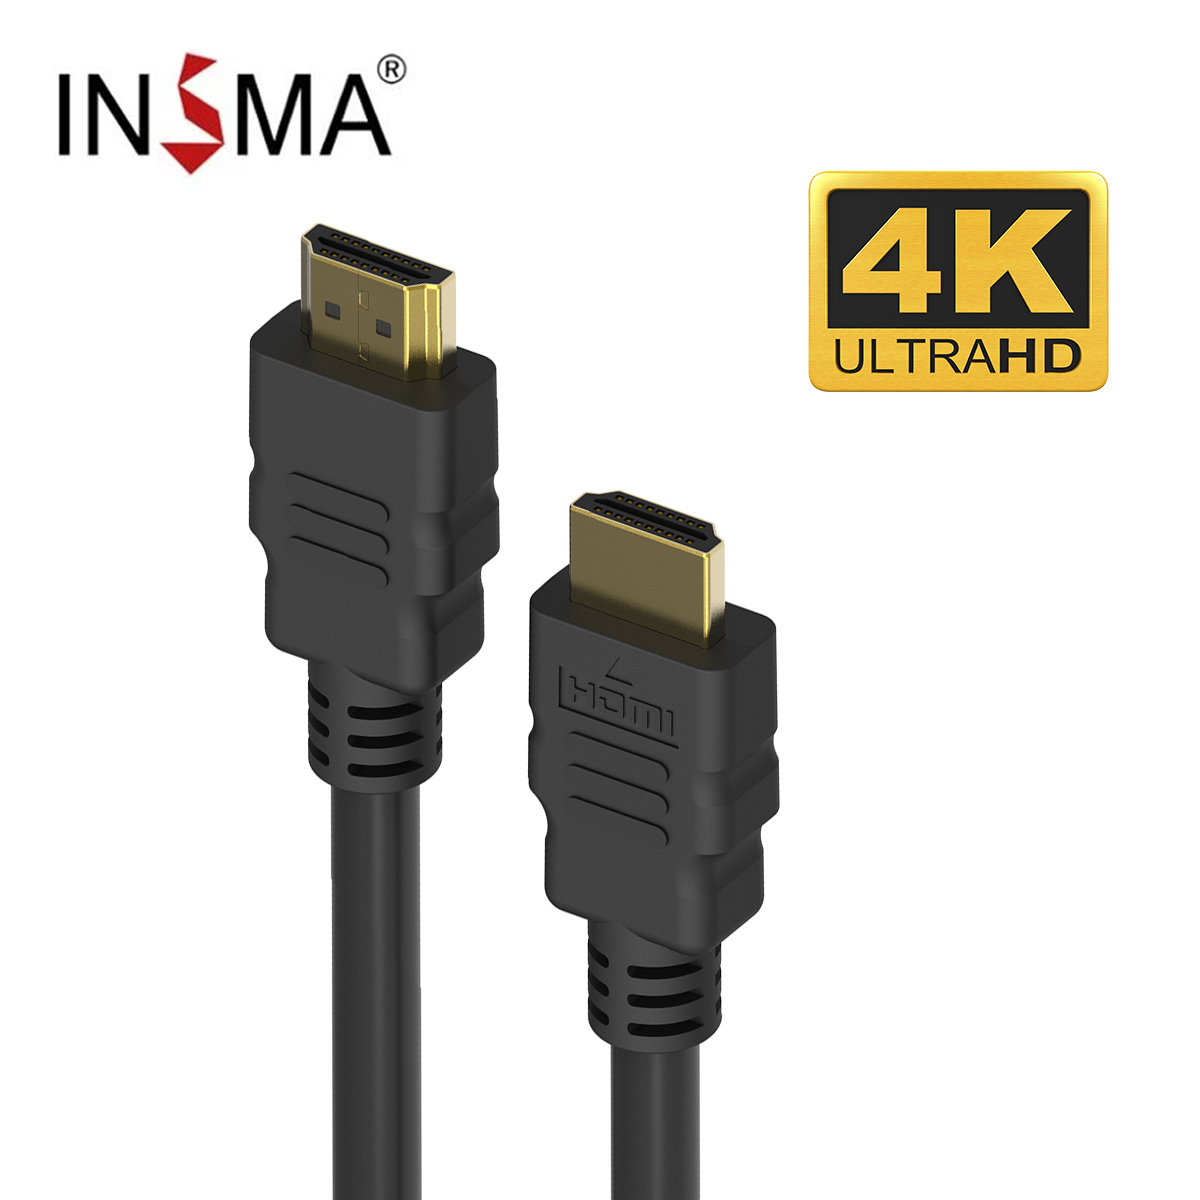 INSMA 4K HDMI 1.4 Cable 0.5/1/1.5/2/3m HDMI Male to HDMI Male Cable 1080P 120HZ 18Gbps Gold Plated Connector